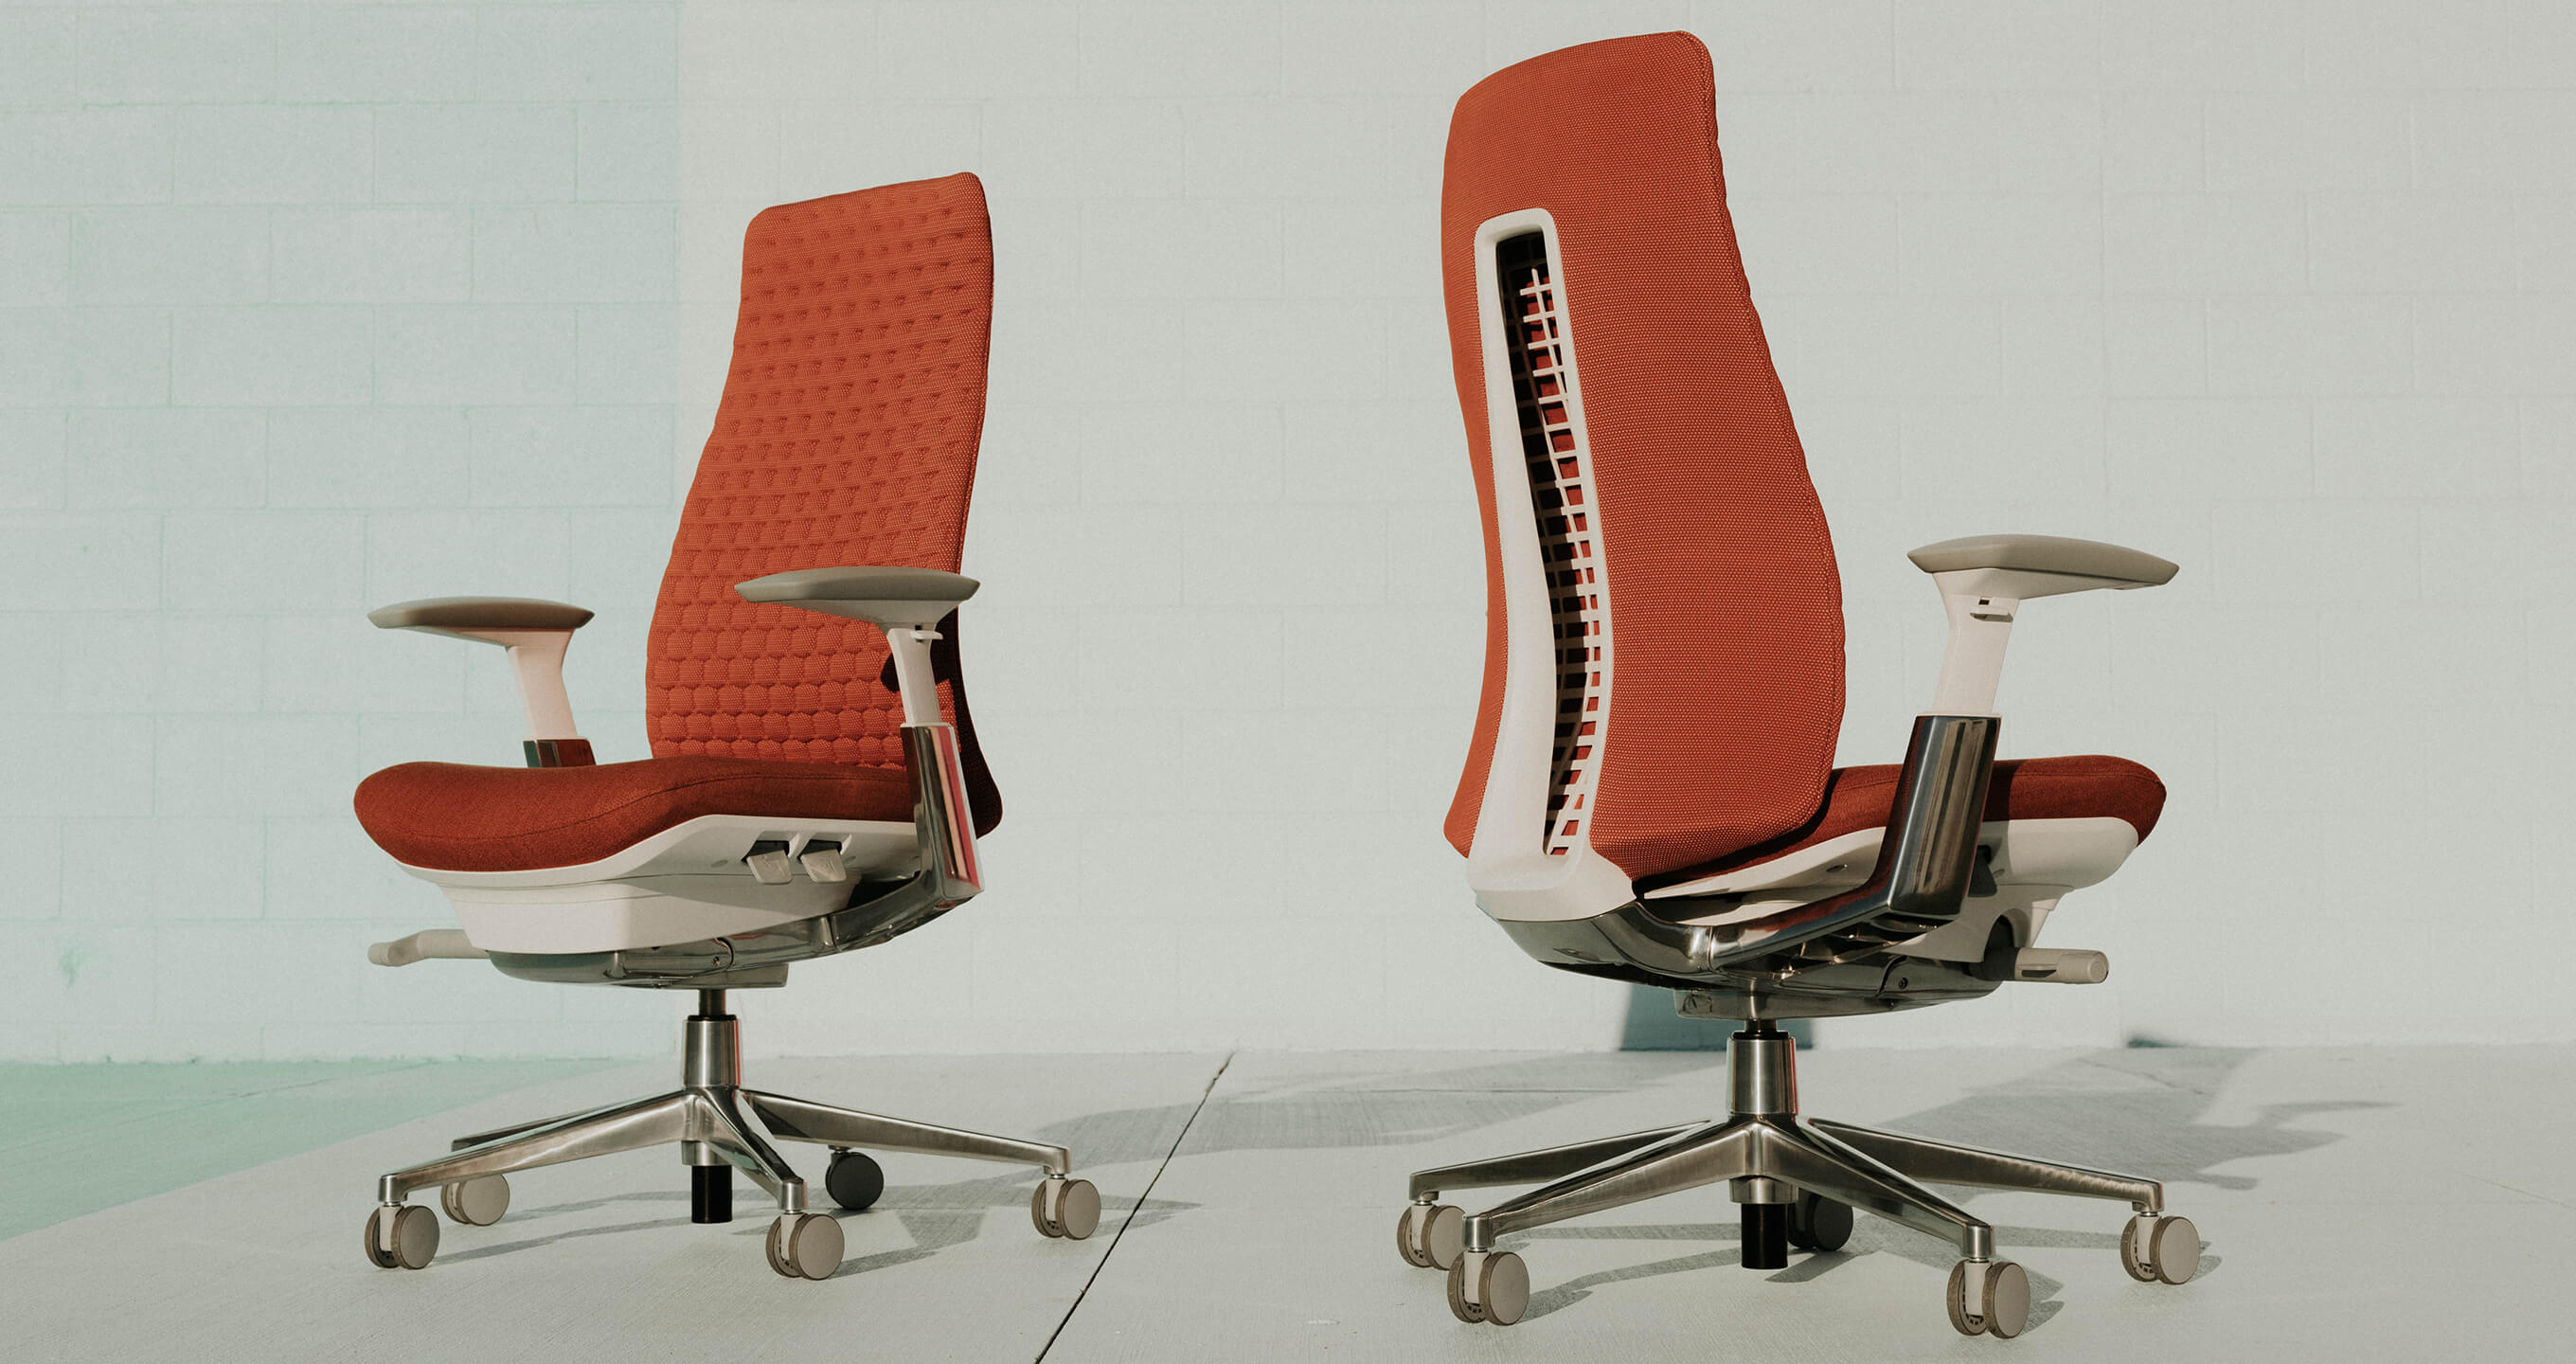 Haworth Fern Task chairs in red upholstery with Digital Knit back 